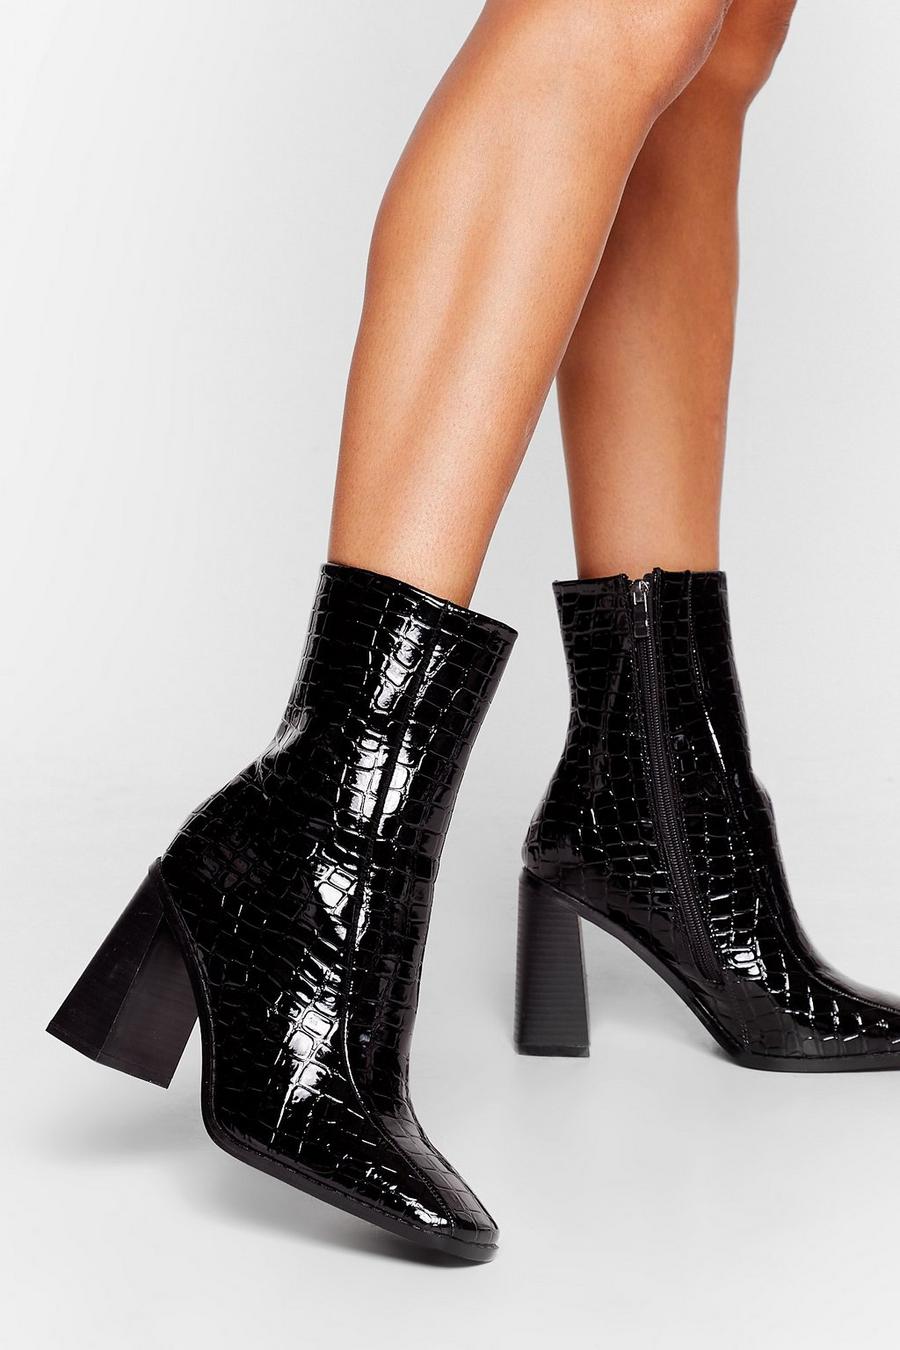 Croc Flared Heeled Ankle Boots